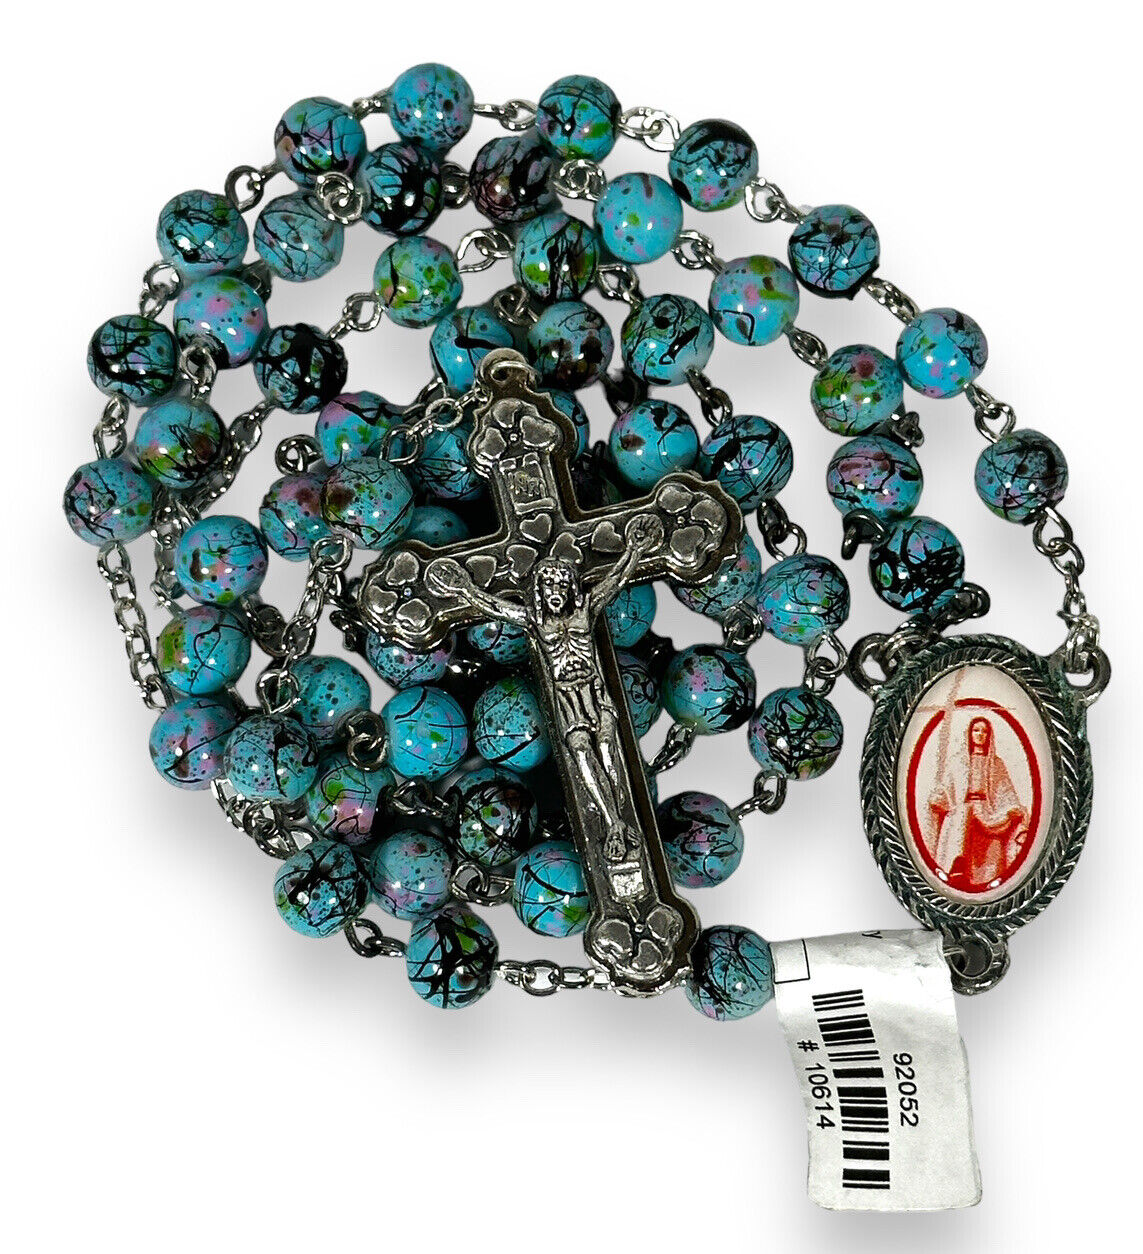 Our Lady of Martyrs Blue Rosary Splatter Glass Beads with Tag, Catholic 5 Decade